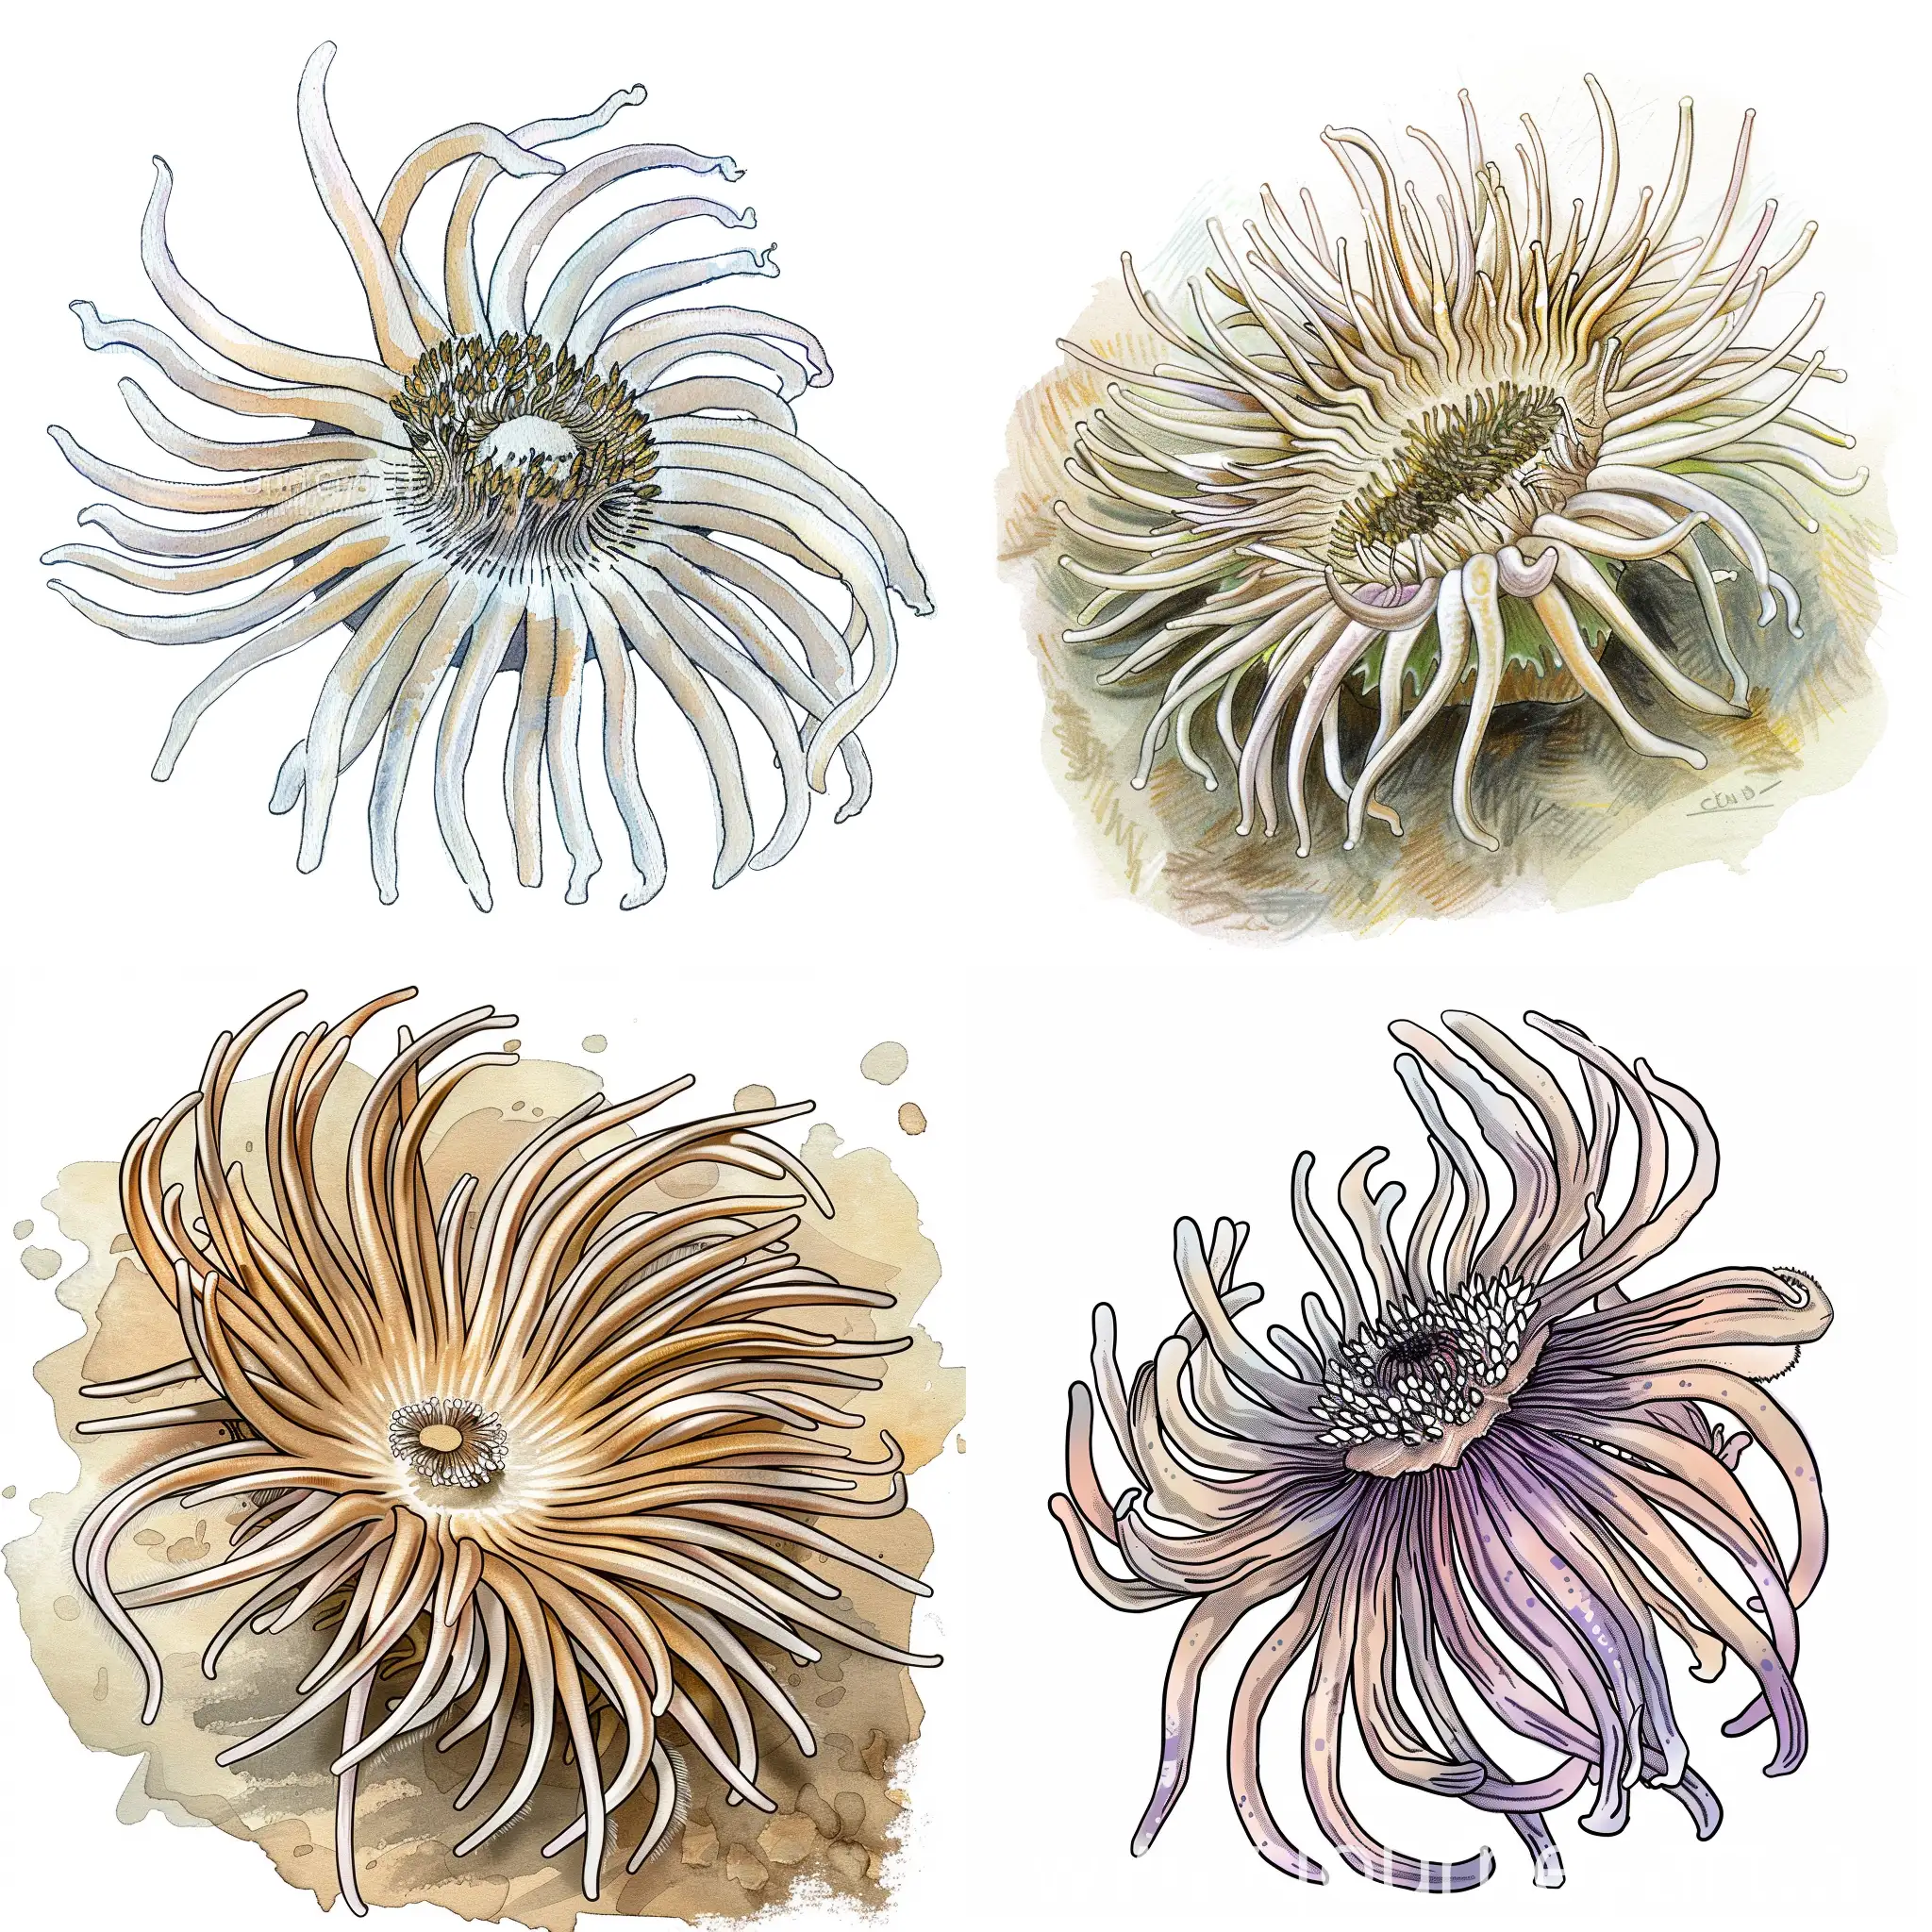 A drawing illustration of one anemone facing slightly to the left